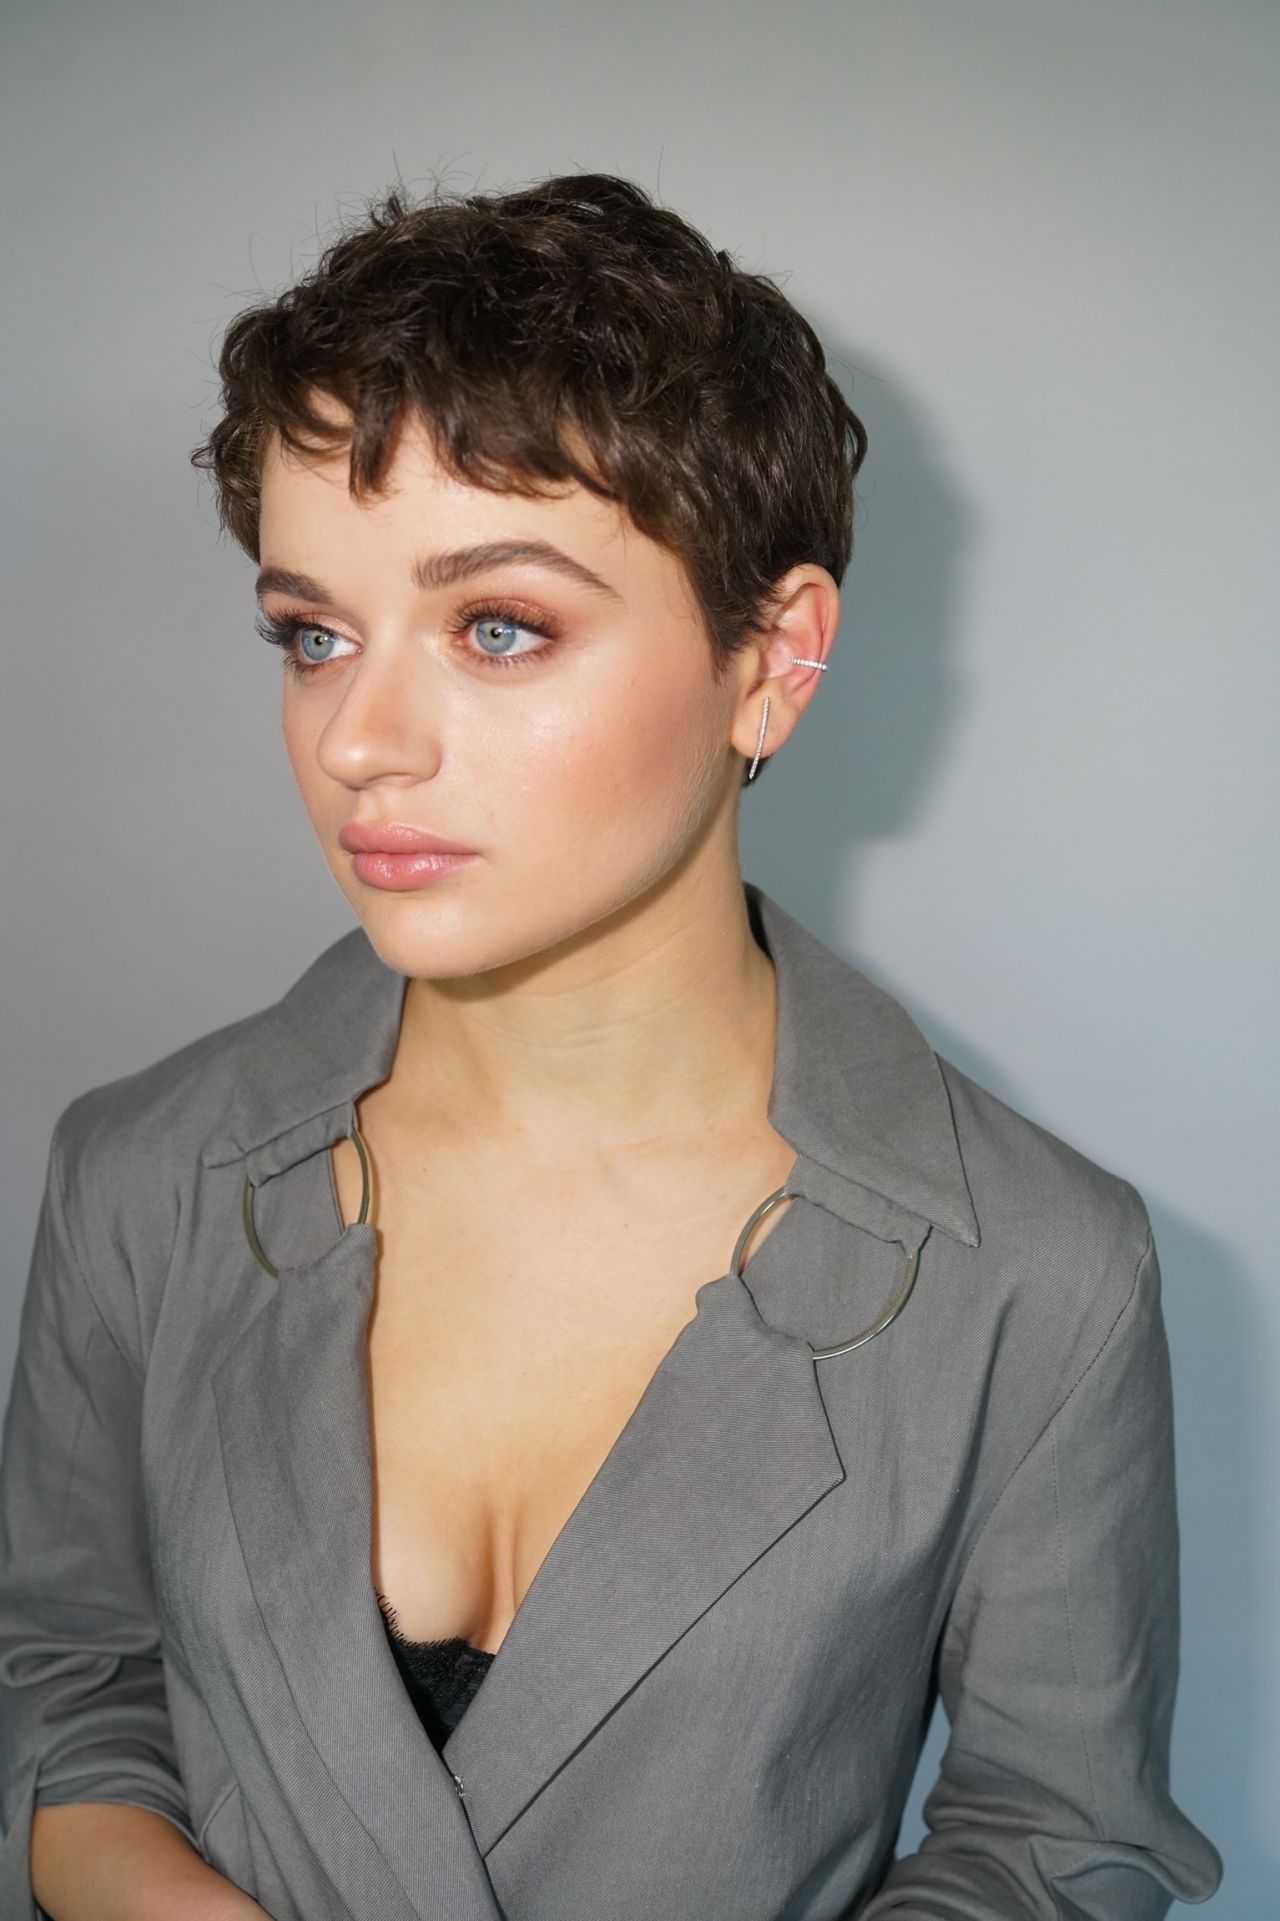 70+ Hot And Sexy Pictures Of Joey King Exposes Her Curvy Body 10